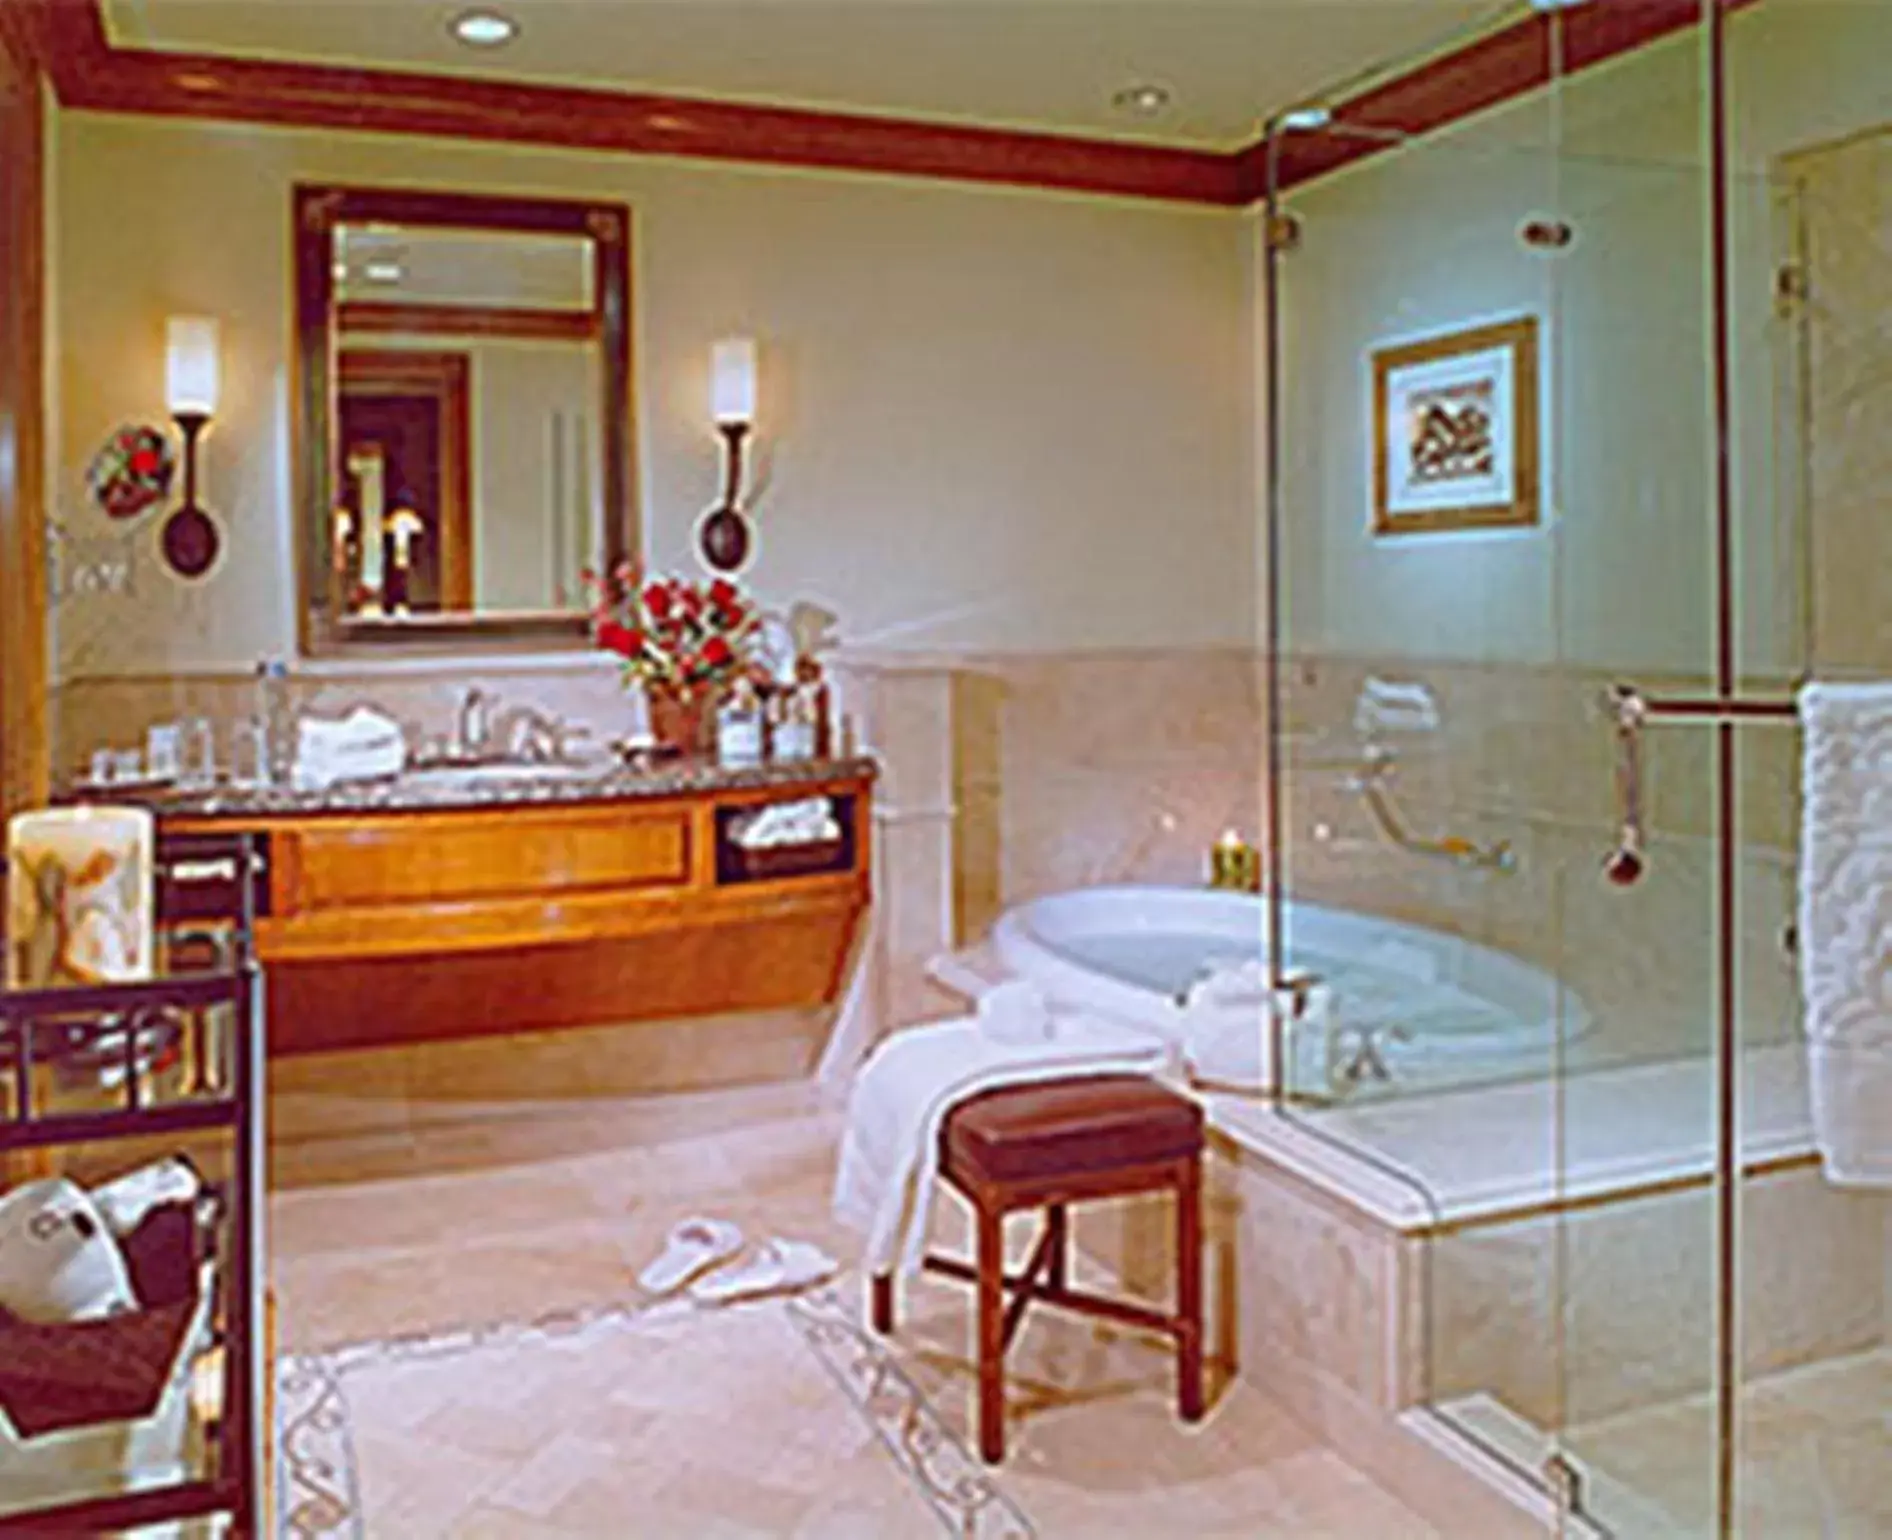 Bathroom in The Rose Hotel